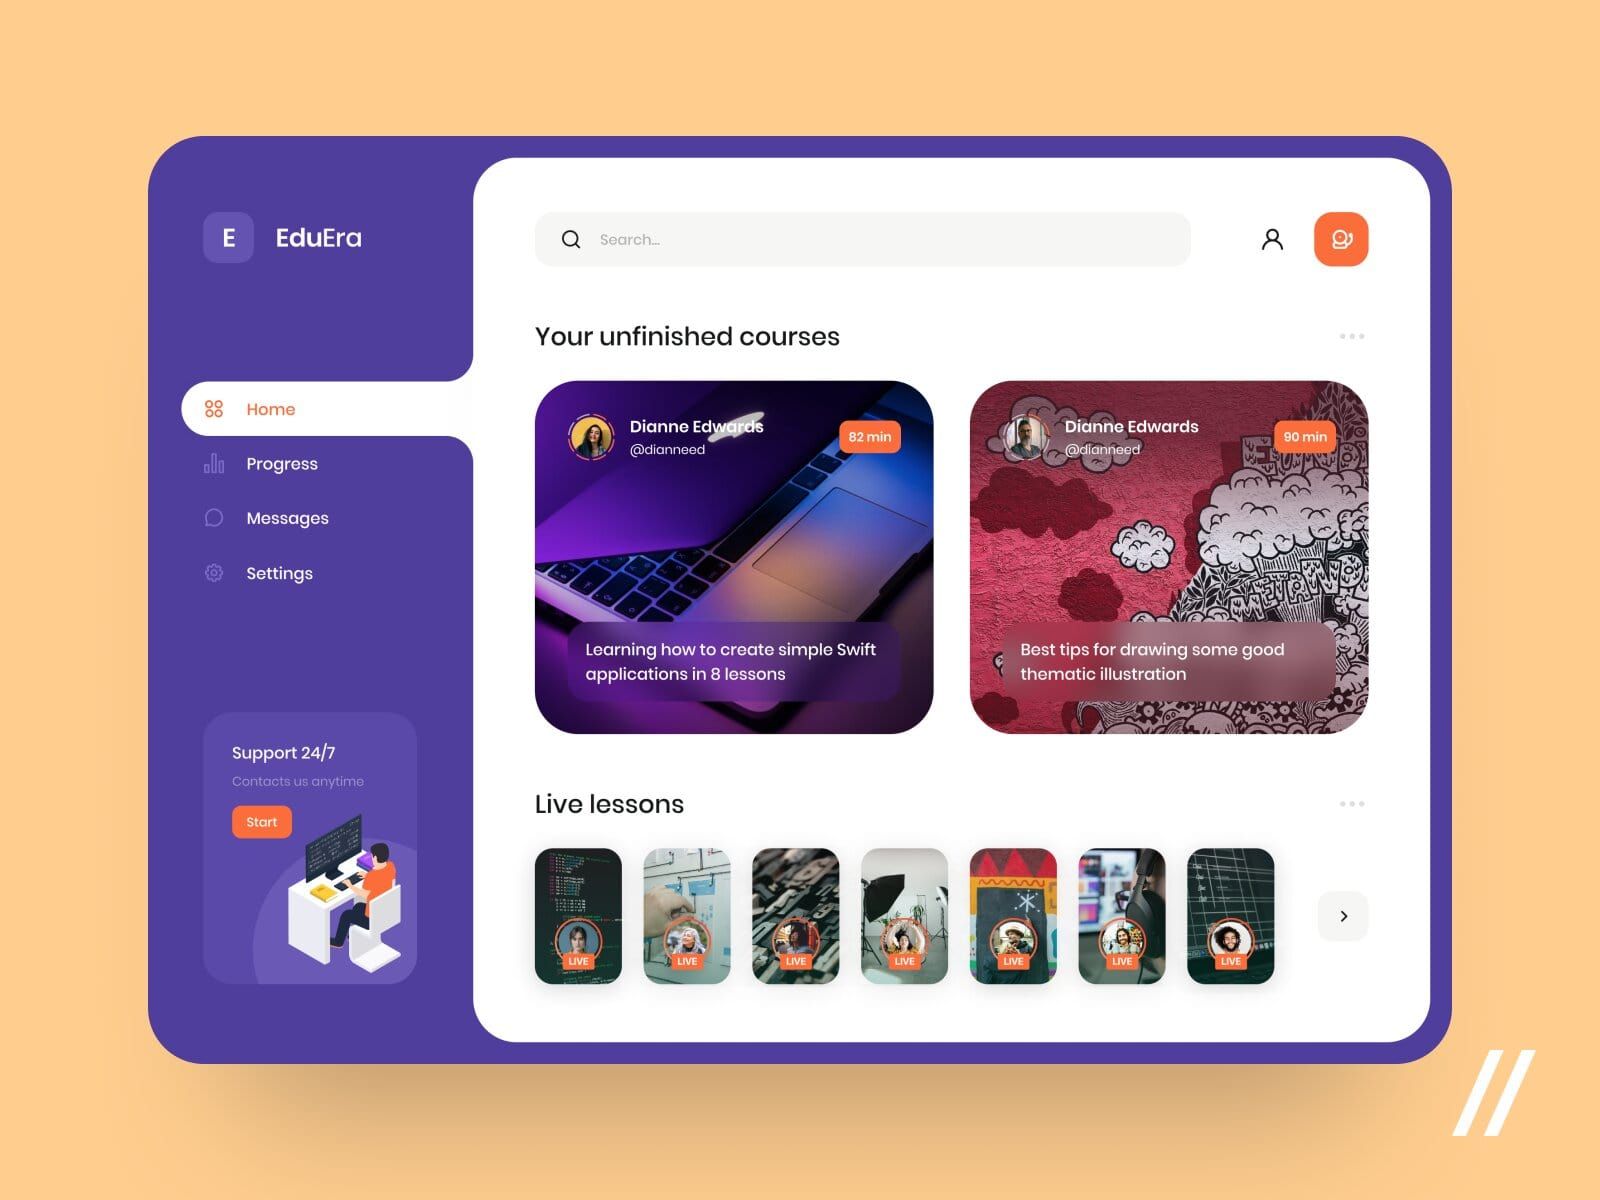 You can build e-Learning platforms for any purpose: whether it’s a live online lesson, pre-recorded online course or a management platform for offline learning experience (*image by [Purrweb UX](https://dribbble.com/purrwebux){ rel="nofollow" .default-md}*)